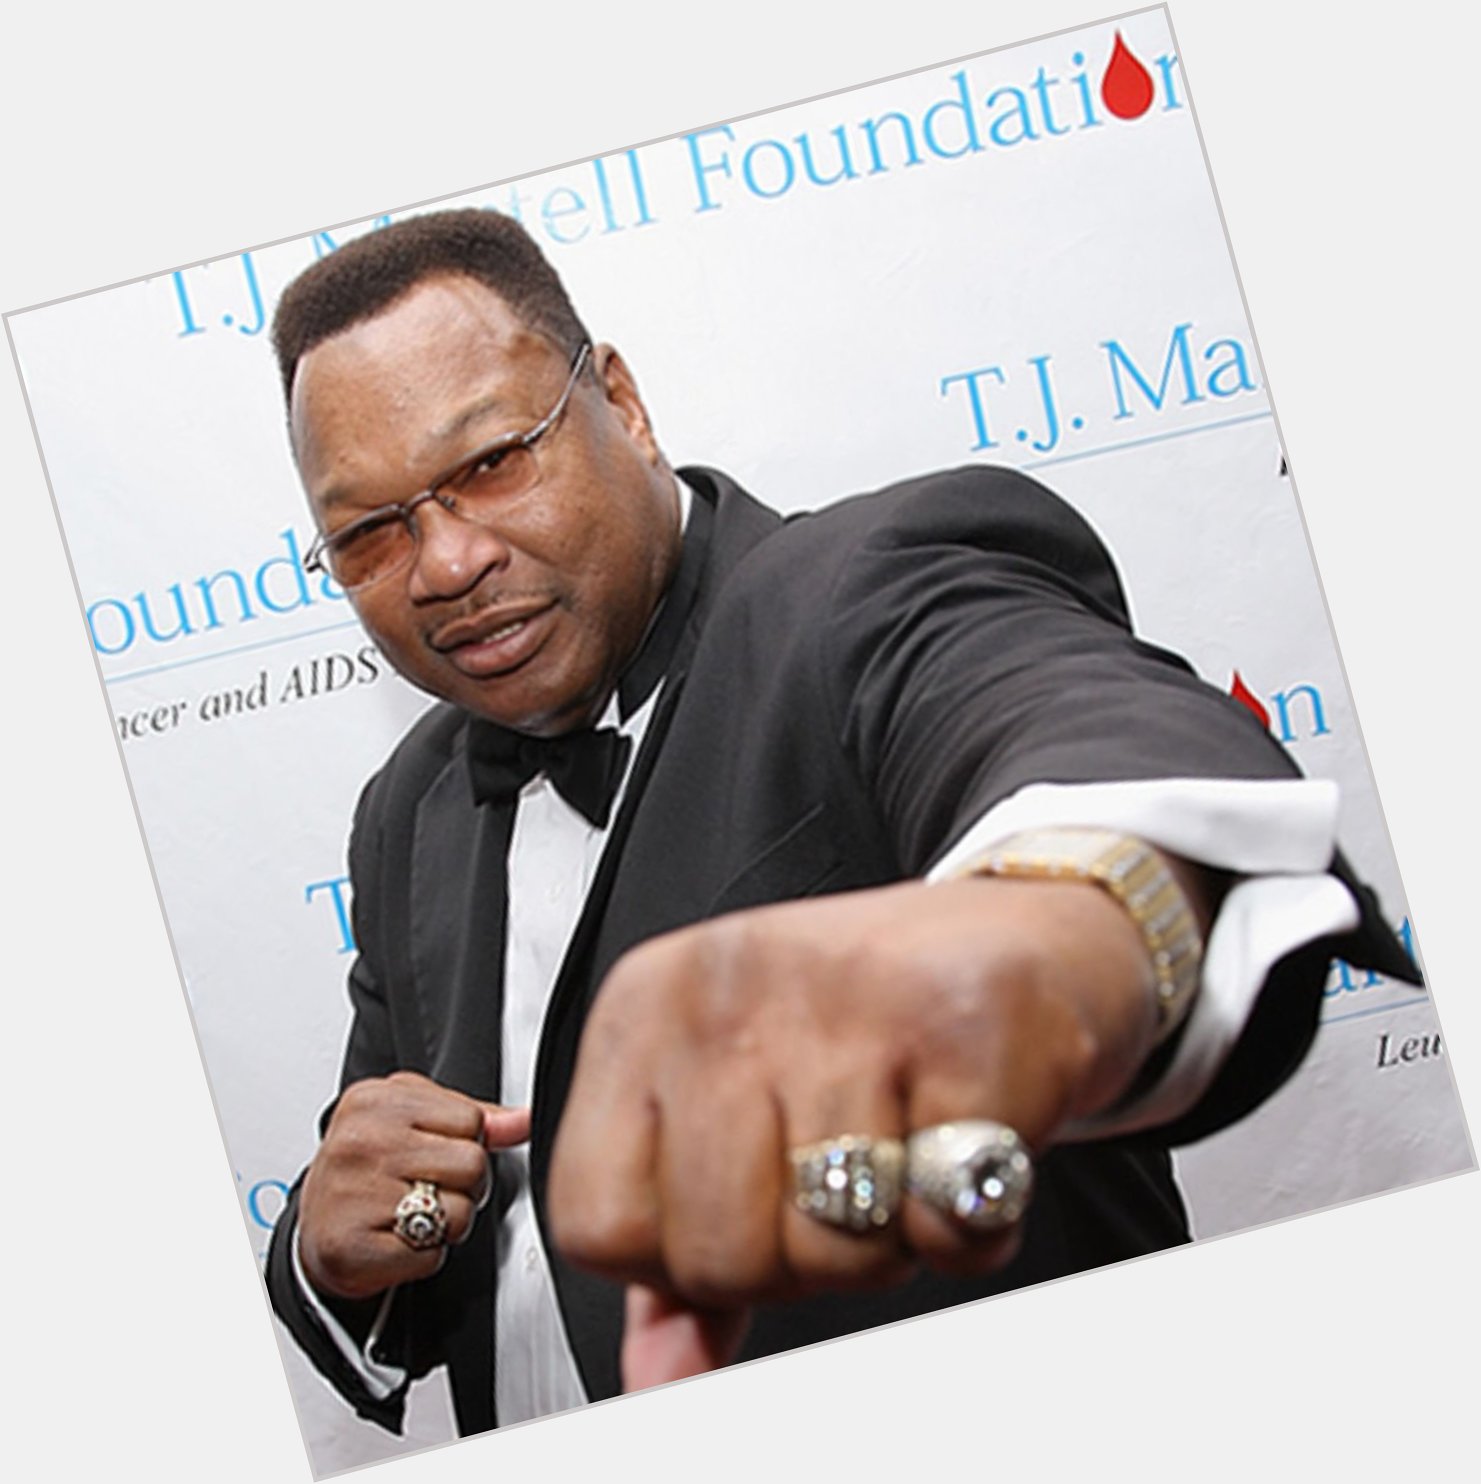 Happy birthday to Larry Holmes! The former WBC Heavyweight Champion turns 66 today! 